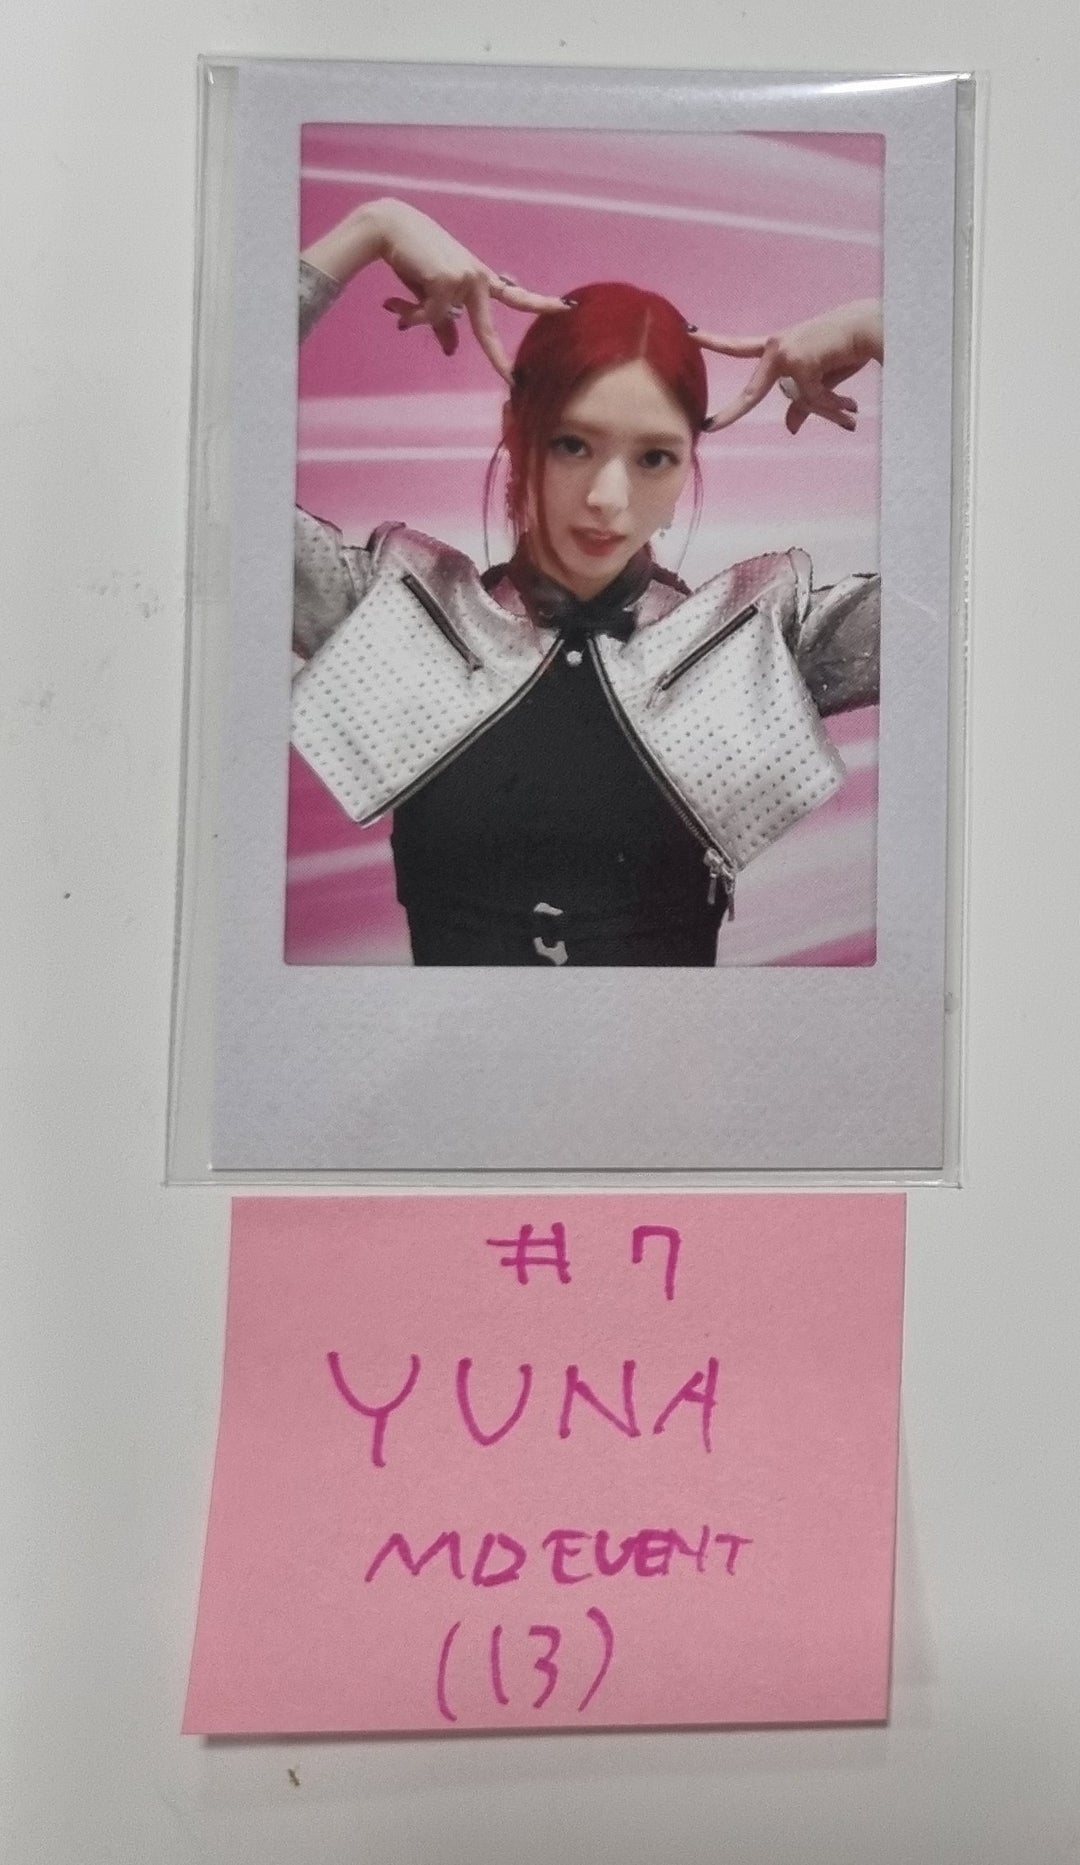 Itzy "BORN To BE" 2ND WORLD TOUR - Official MD Event Photocard [24.2.24]